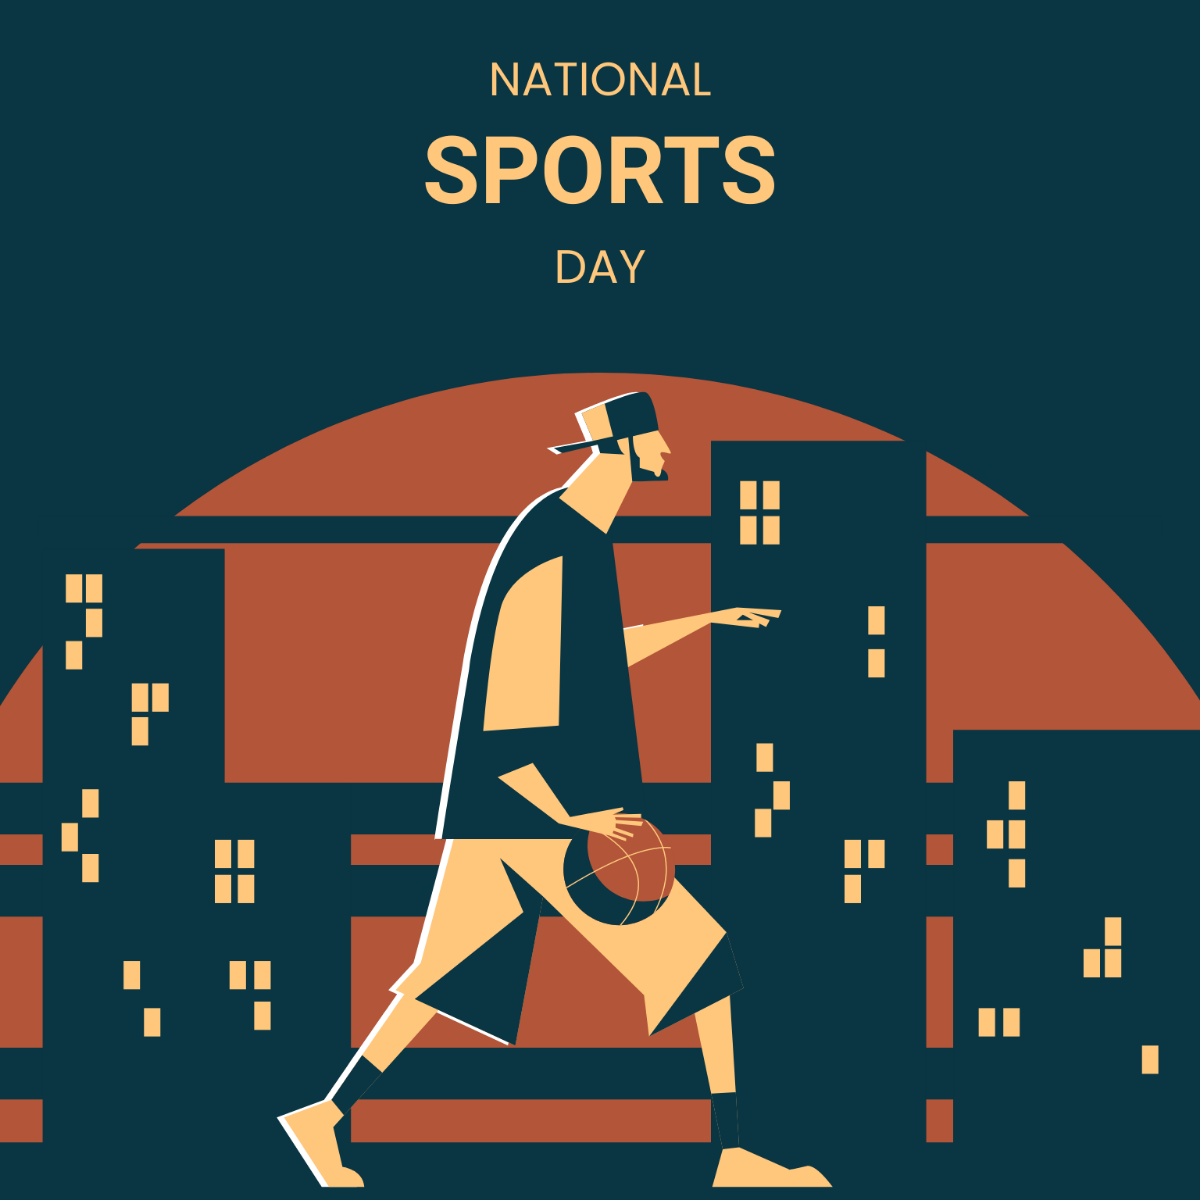 Free National Sports Day Cartoon Vector Template